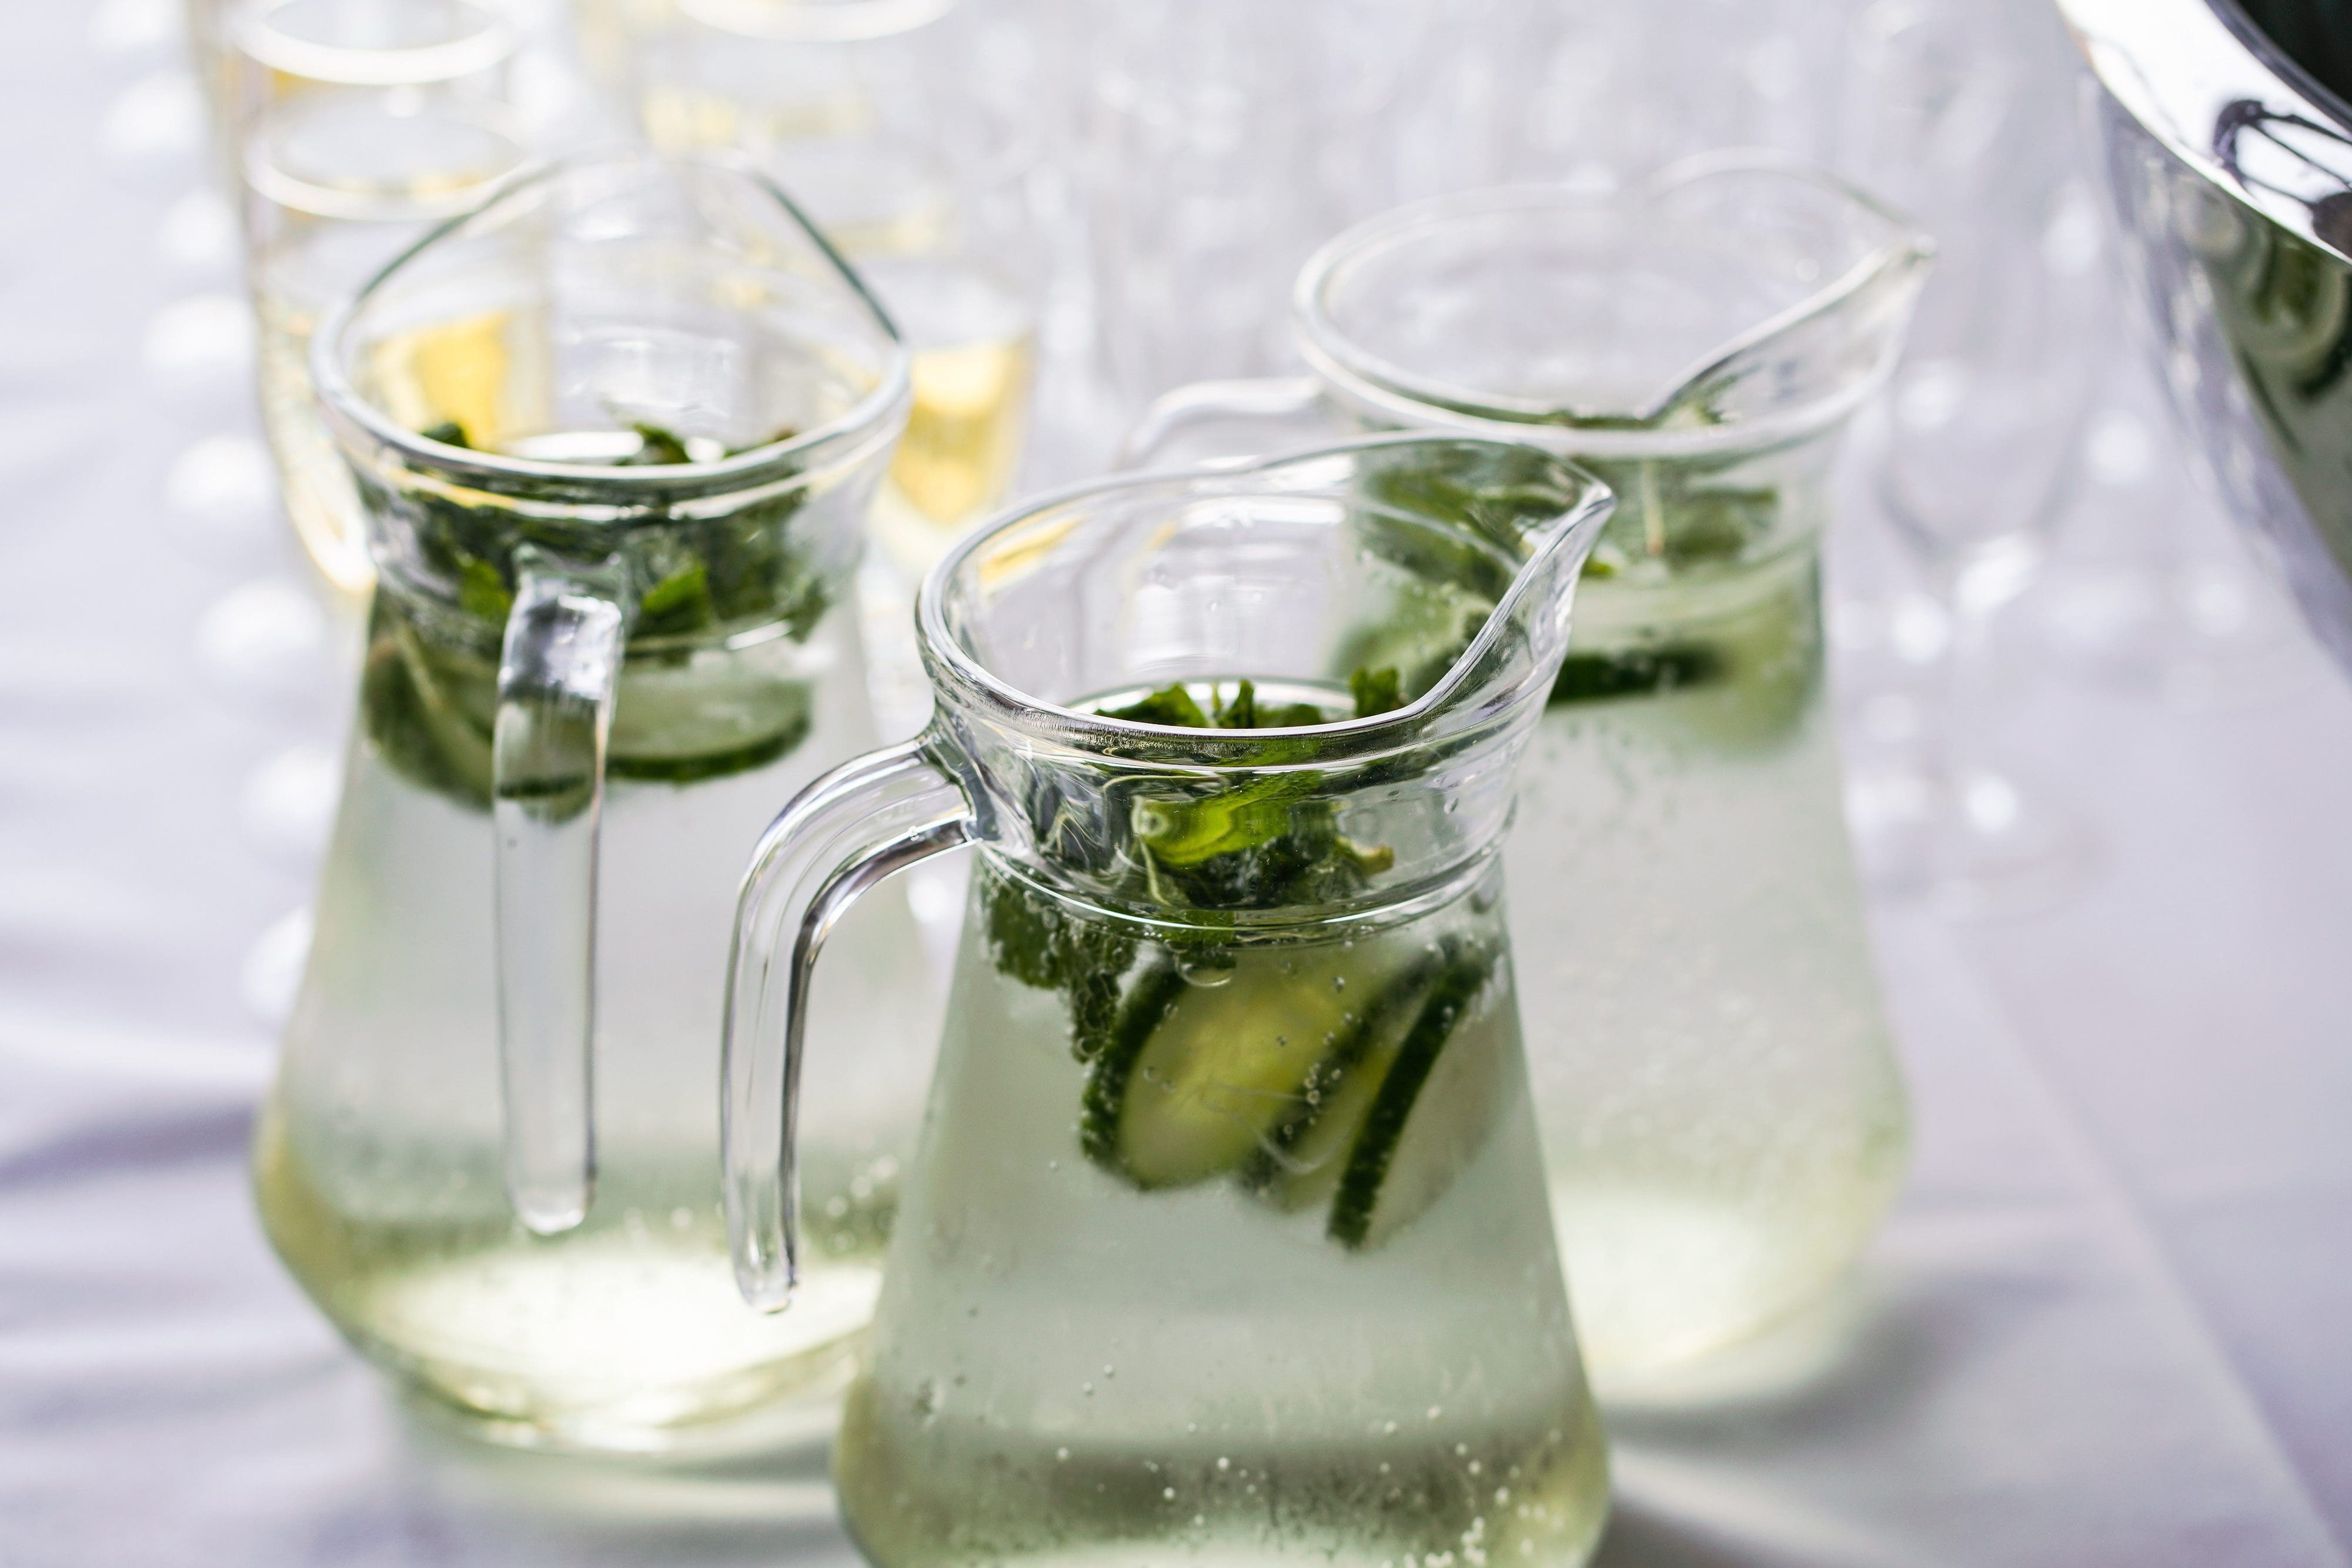 Jugs of cucumber-infused water